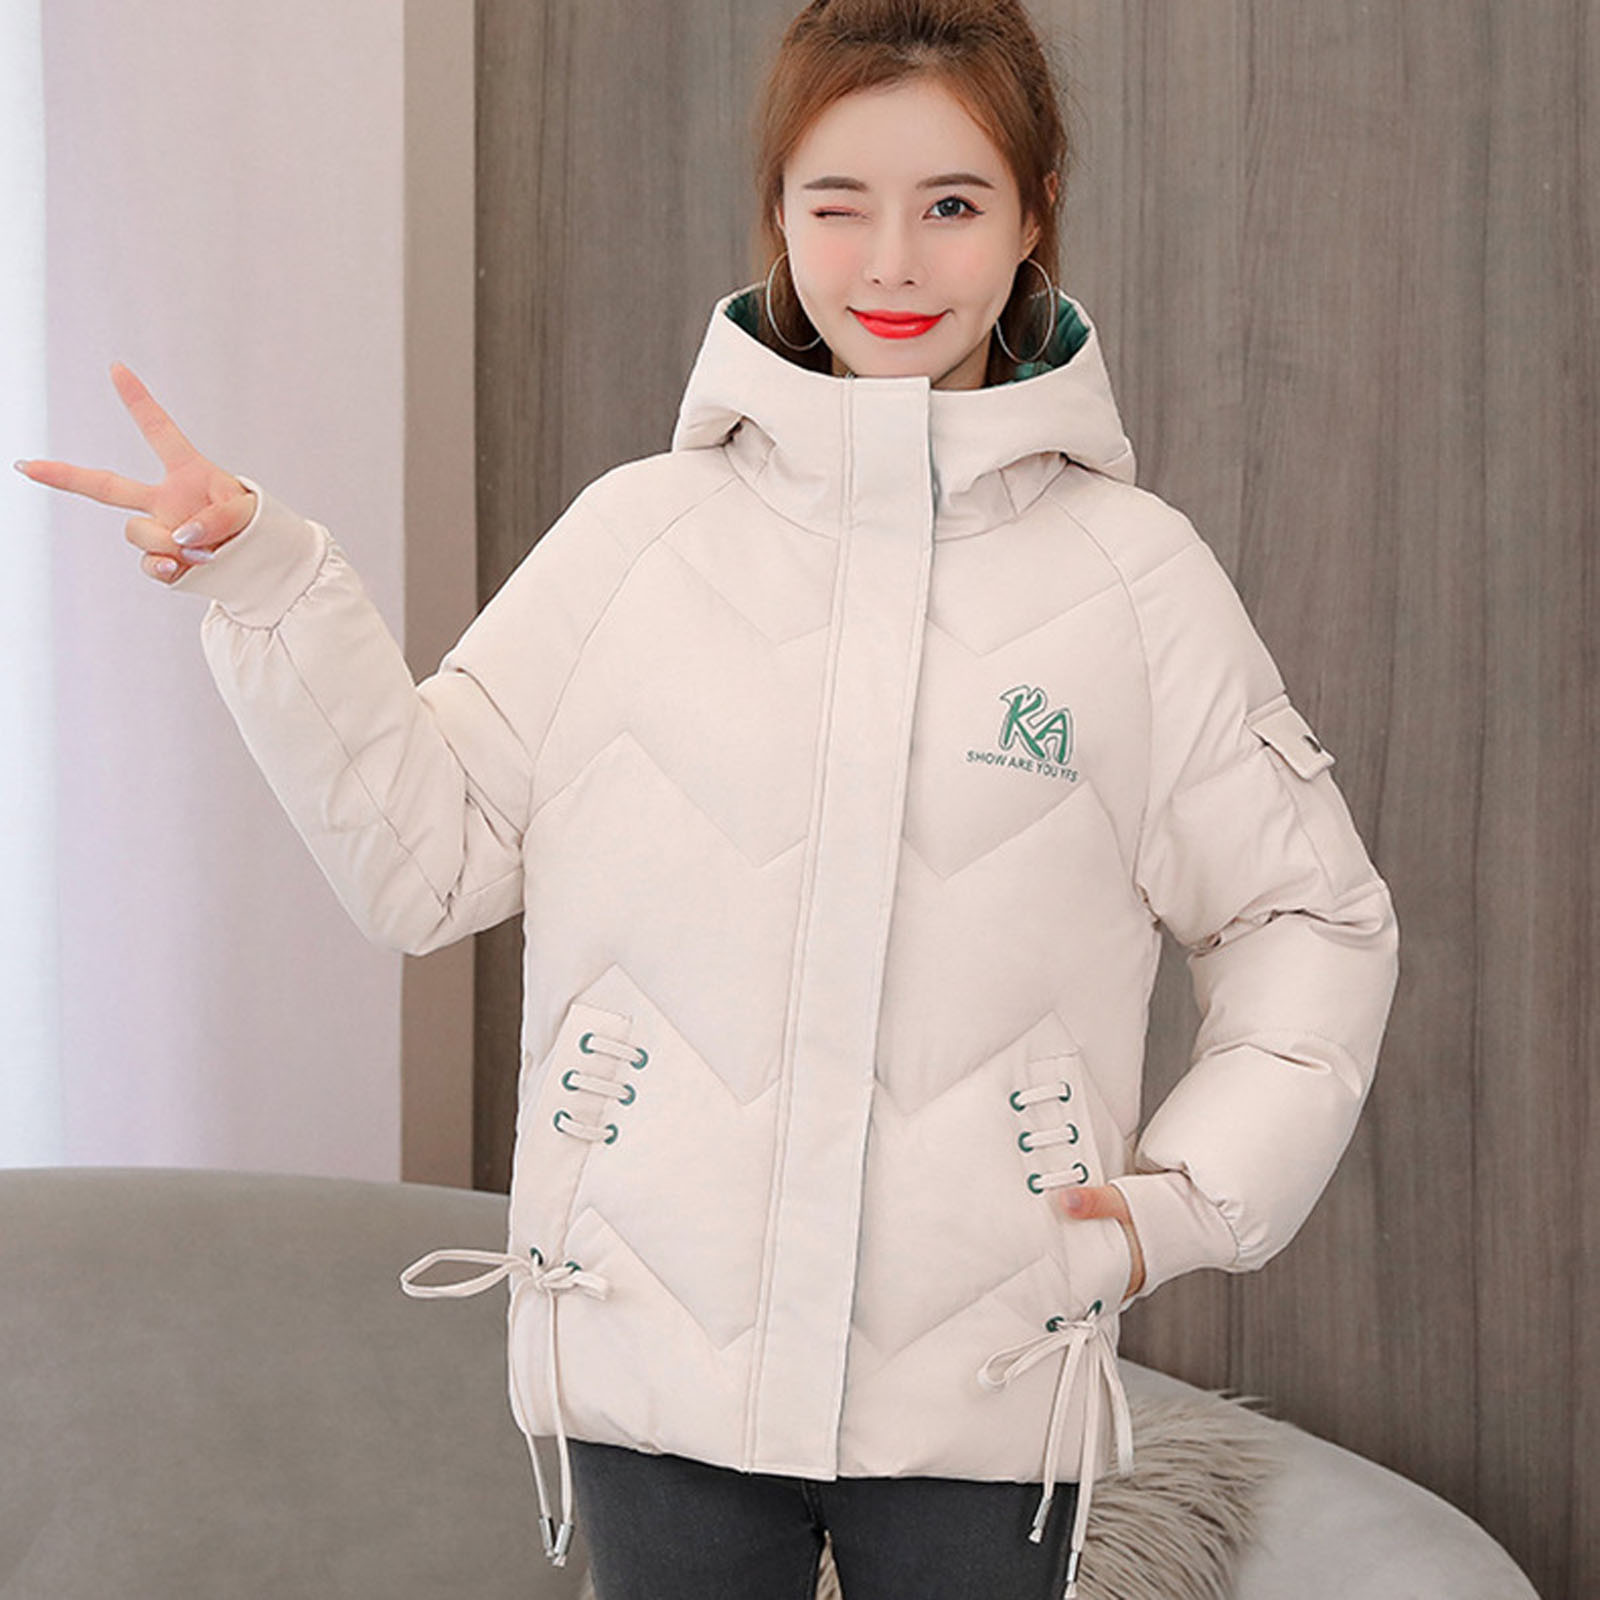 Olyvenn Stylish Woman Fashion Long Sleeves Comfortable Loose Tops Hooded  Long Coat Blouse Cold Weather Thicken Furry Lined Thermal Down Jackets  White 14 